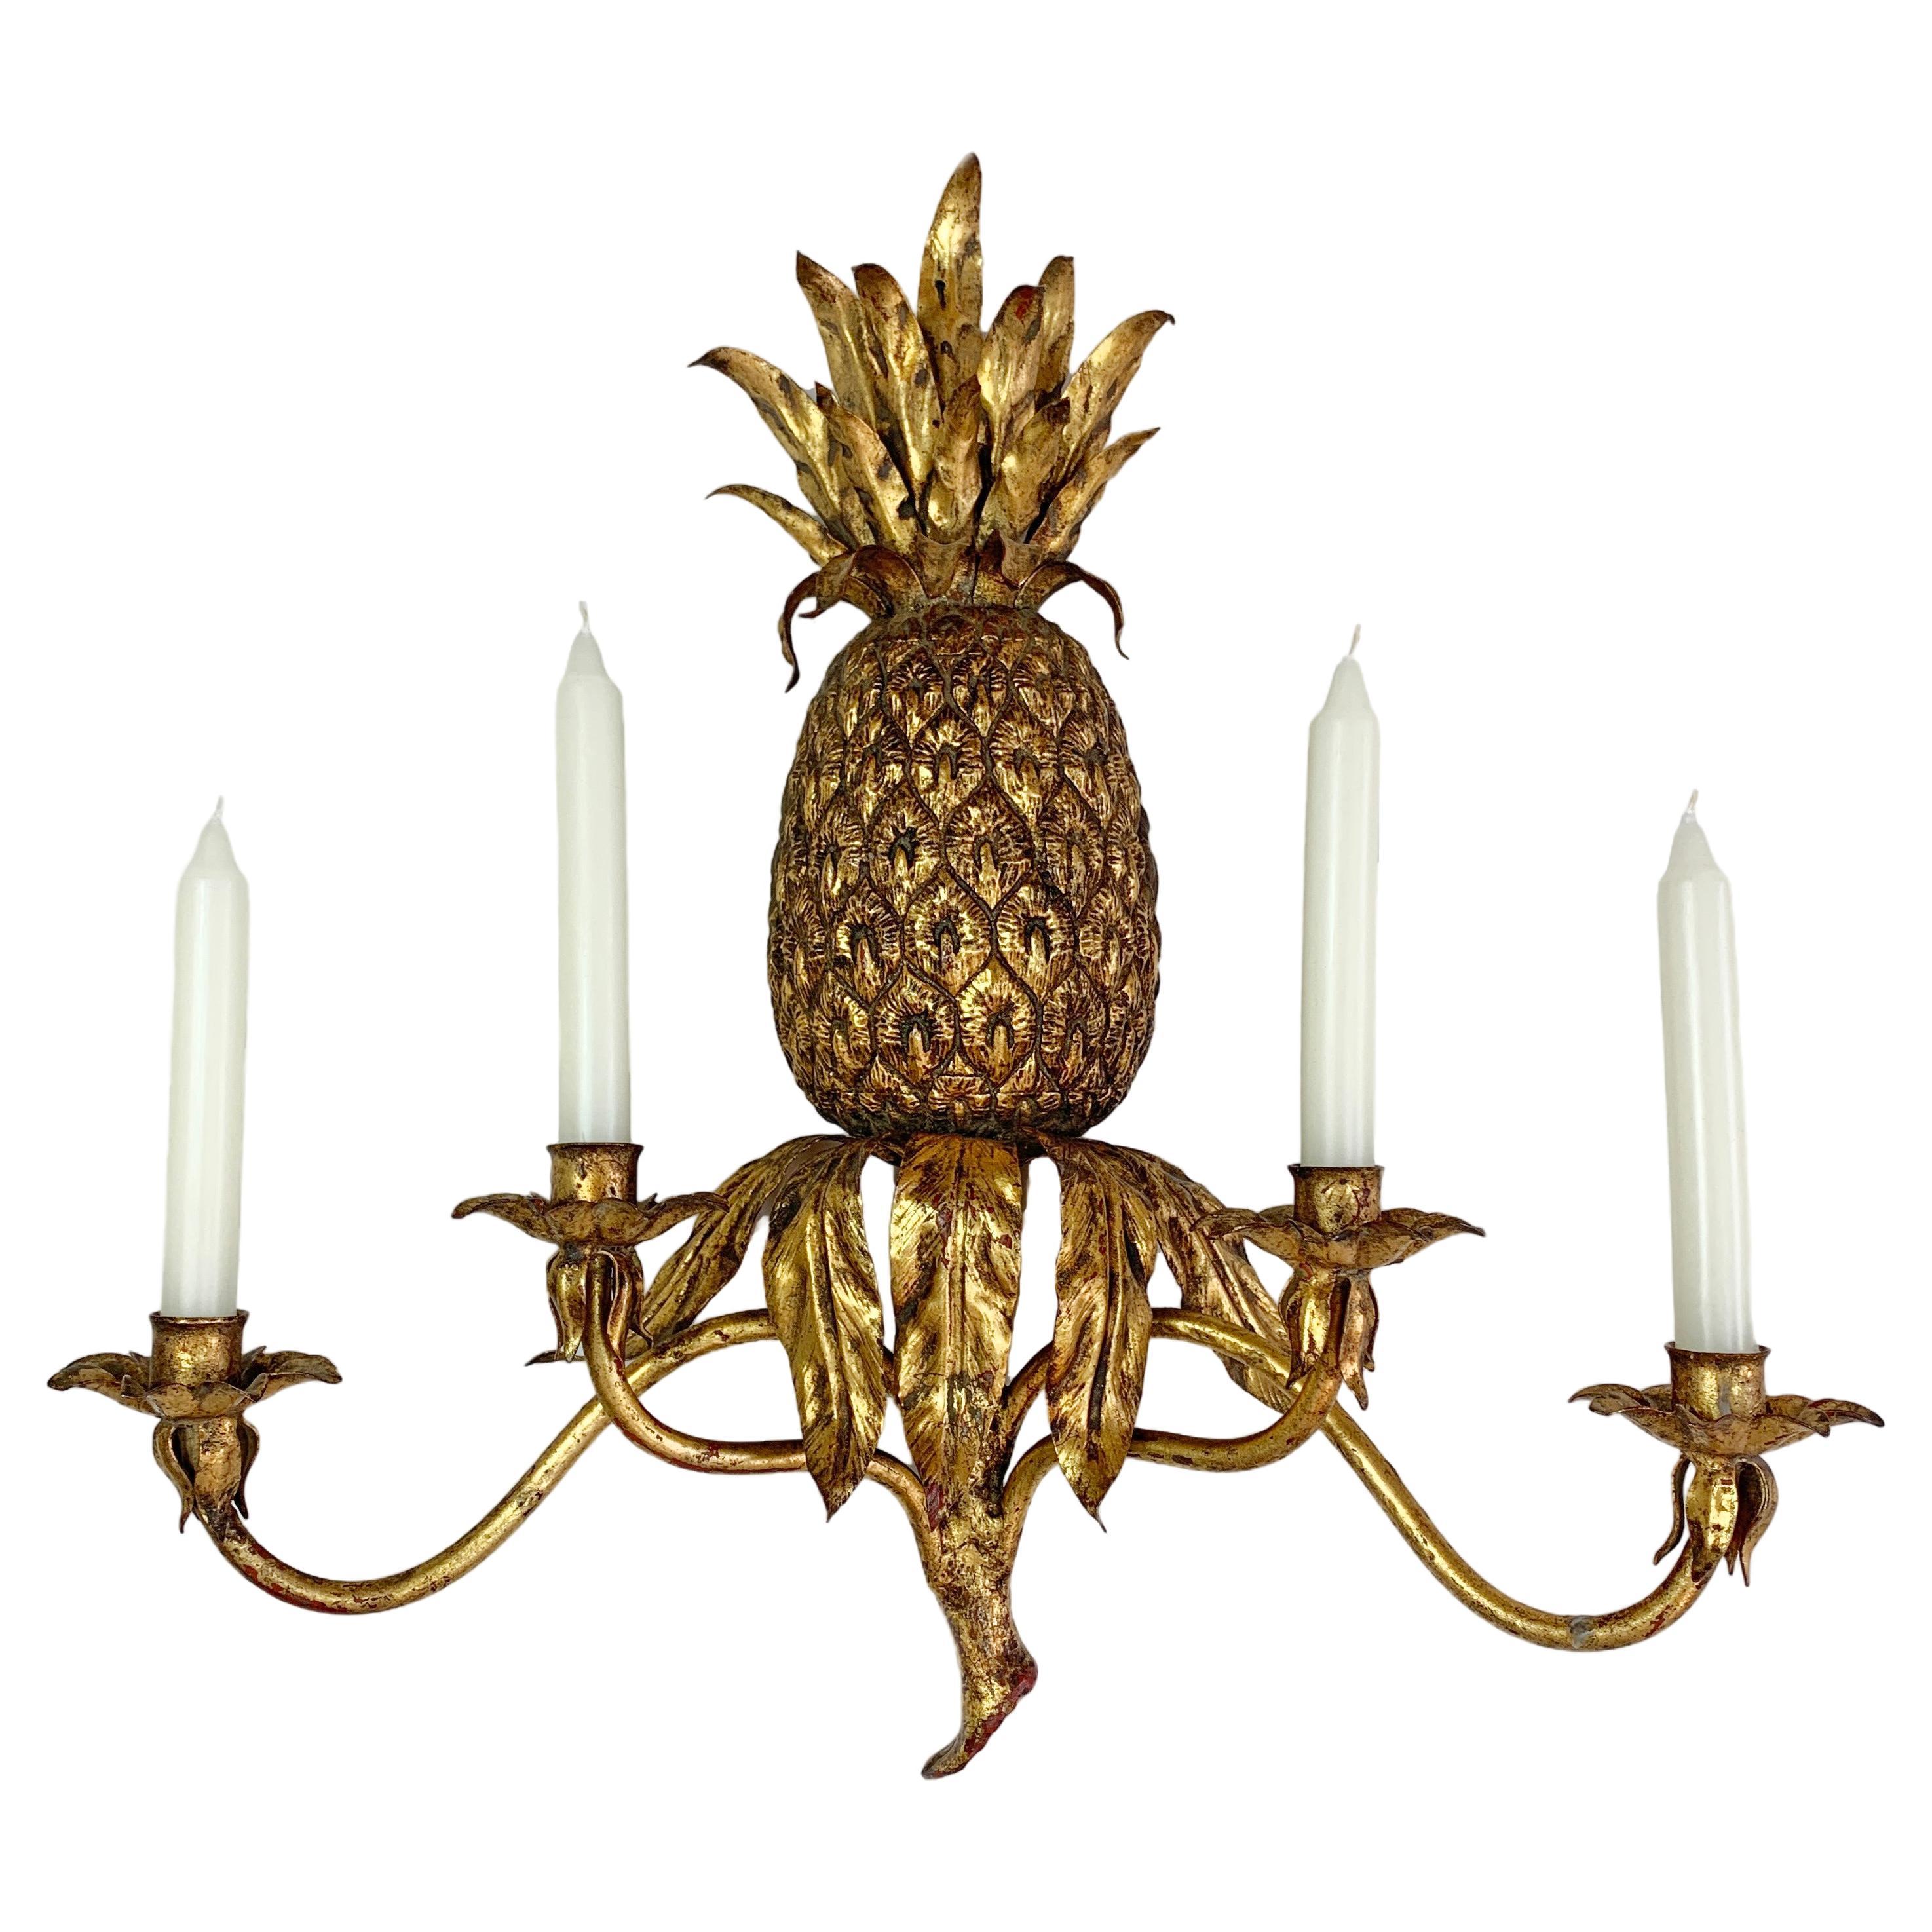 Italian Pineapple Candle Wall Sconce 1950’s Gold Wrought Iron  For Sale